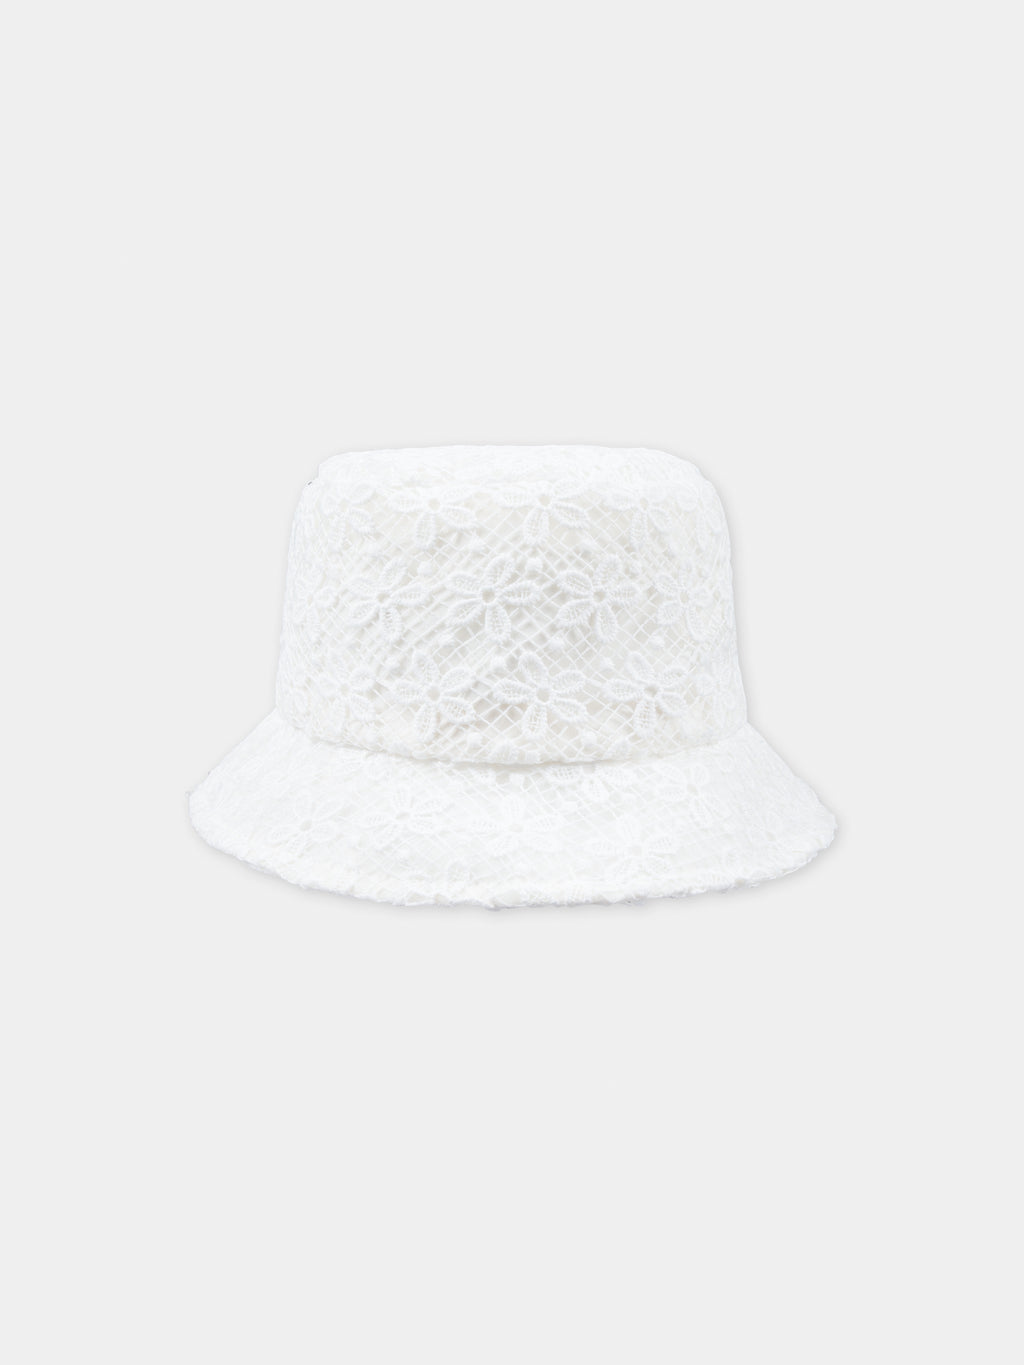 Cloche fille blanche avec broderie florale all-over